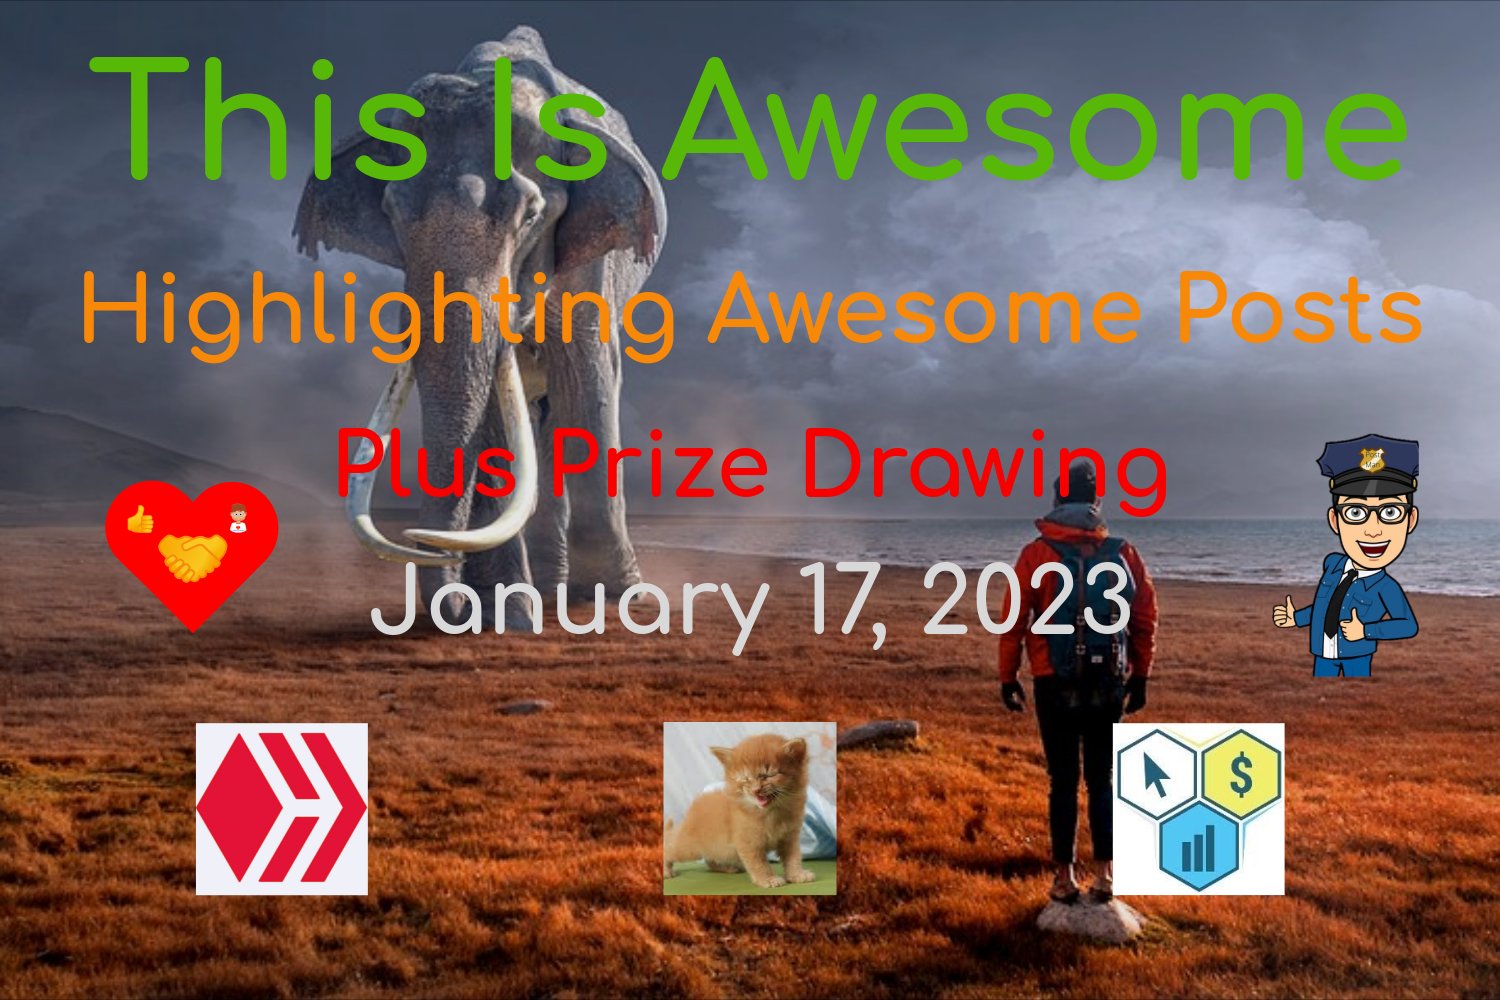 @thisisawesome/this-is-awesome-highlighting-awesome-posts-plus-prize-drawing-january-17-2023